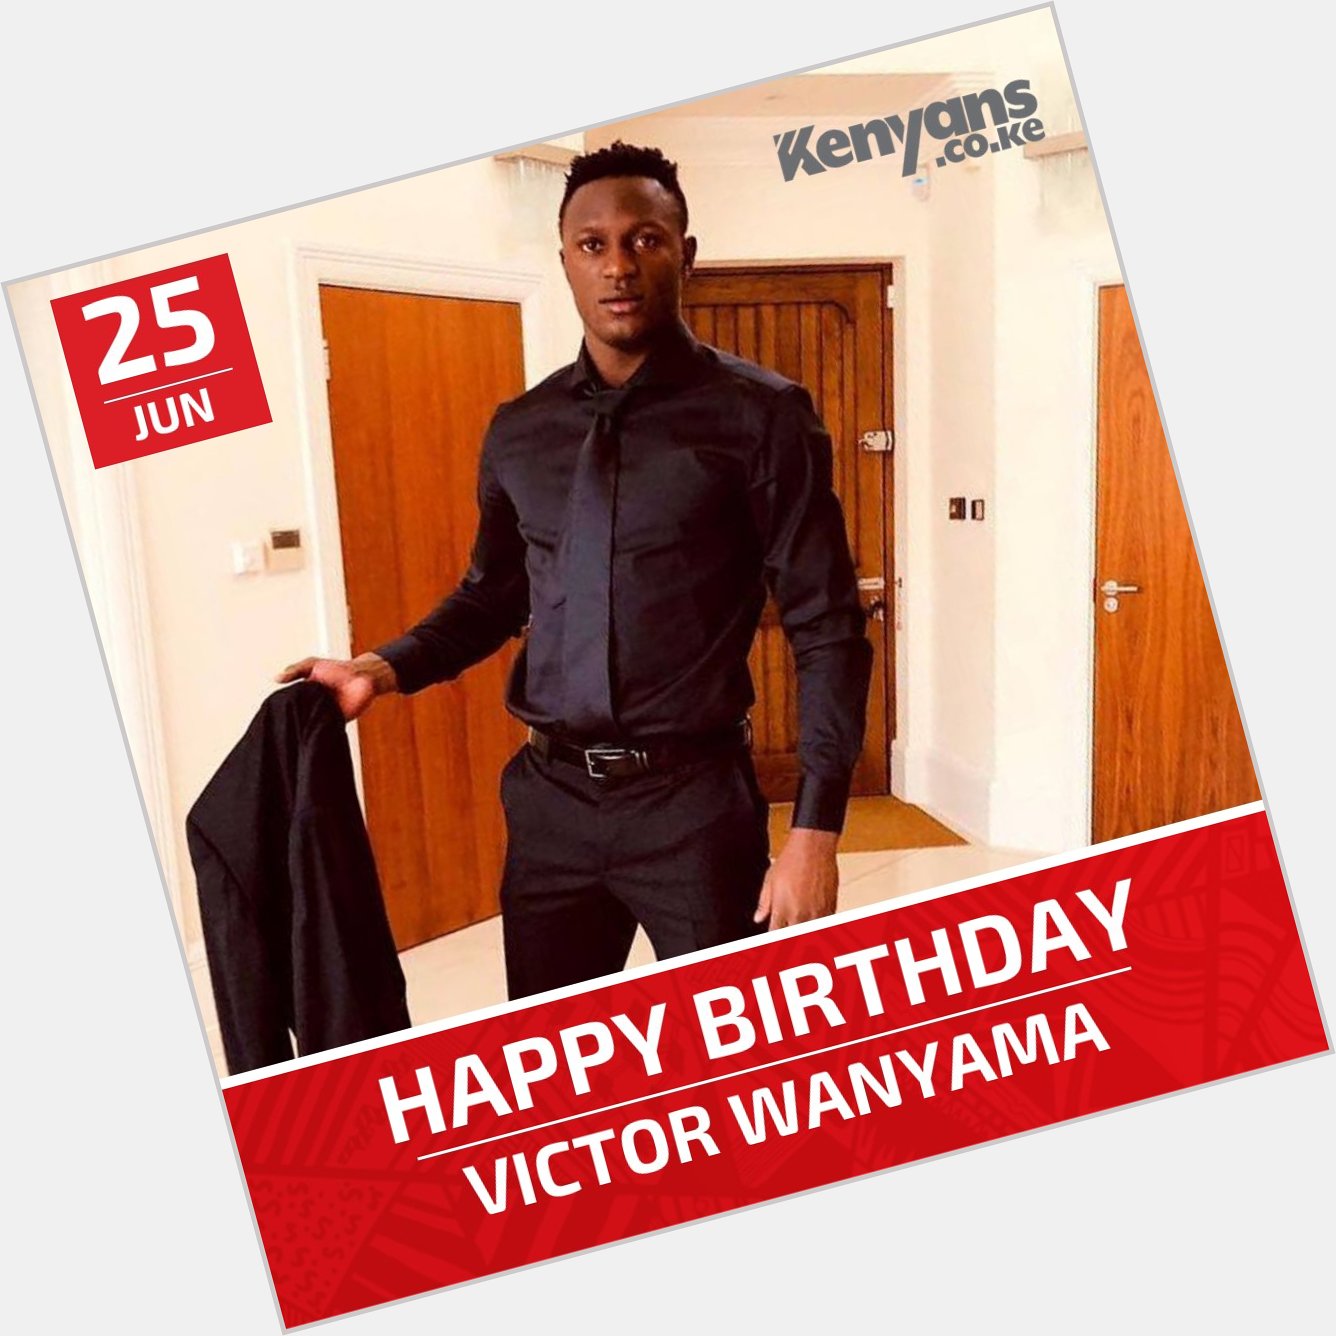 Join us in wishing the talented Victor Wanyama a happy birthday!  